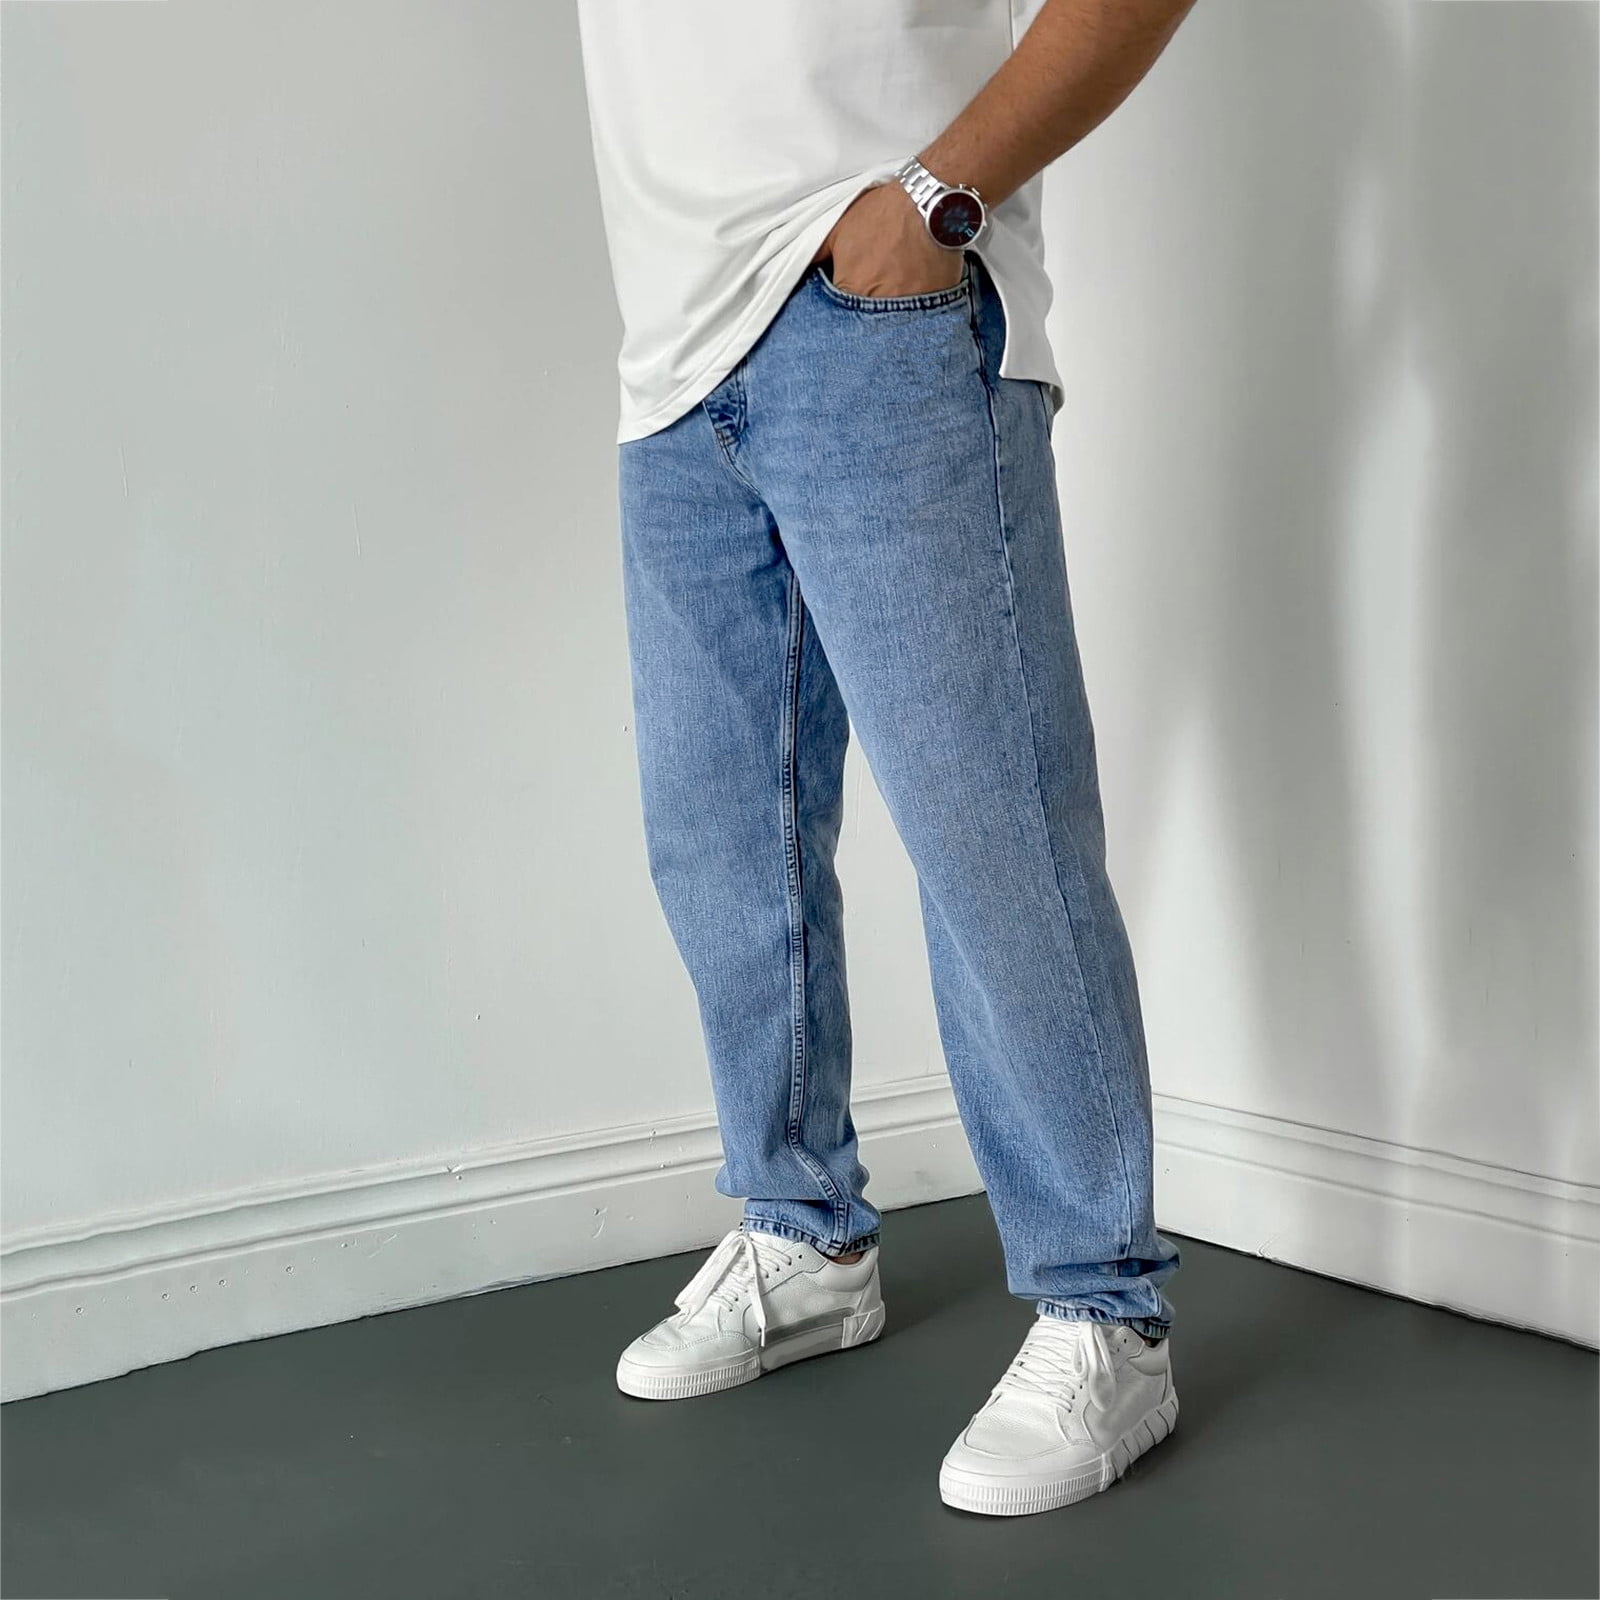 Polyester Full-Length Jean Cargo Pants for Men Blue Leisure Solid Color ...